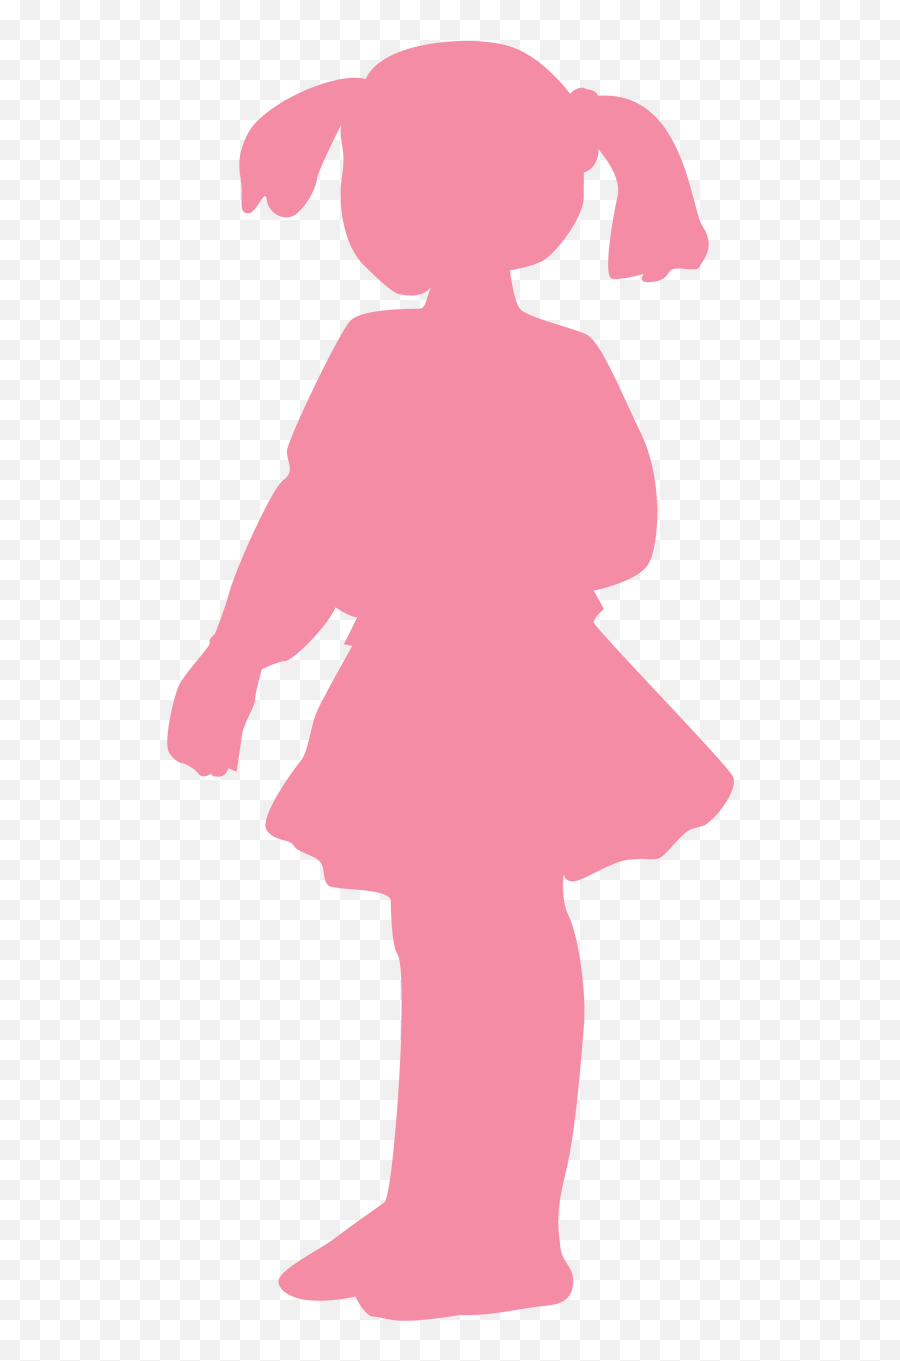 Download Hd Girl Silhouette - Pink Girl Silhouette Png Little Girl With Pigtails Silhouette,Girl Silhouette Png